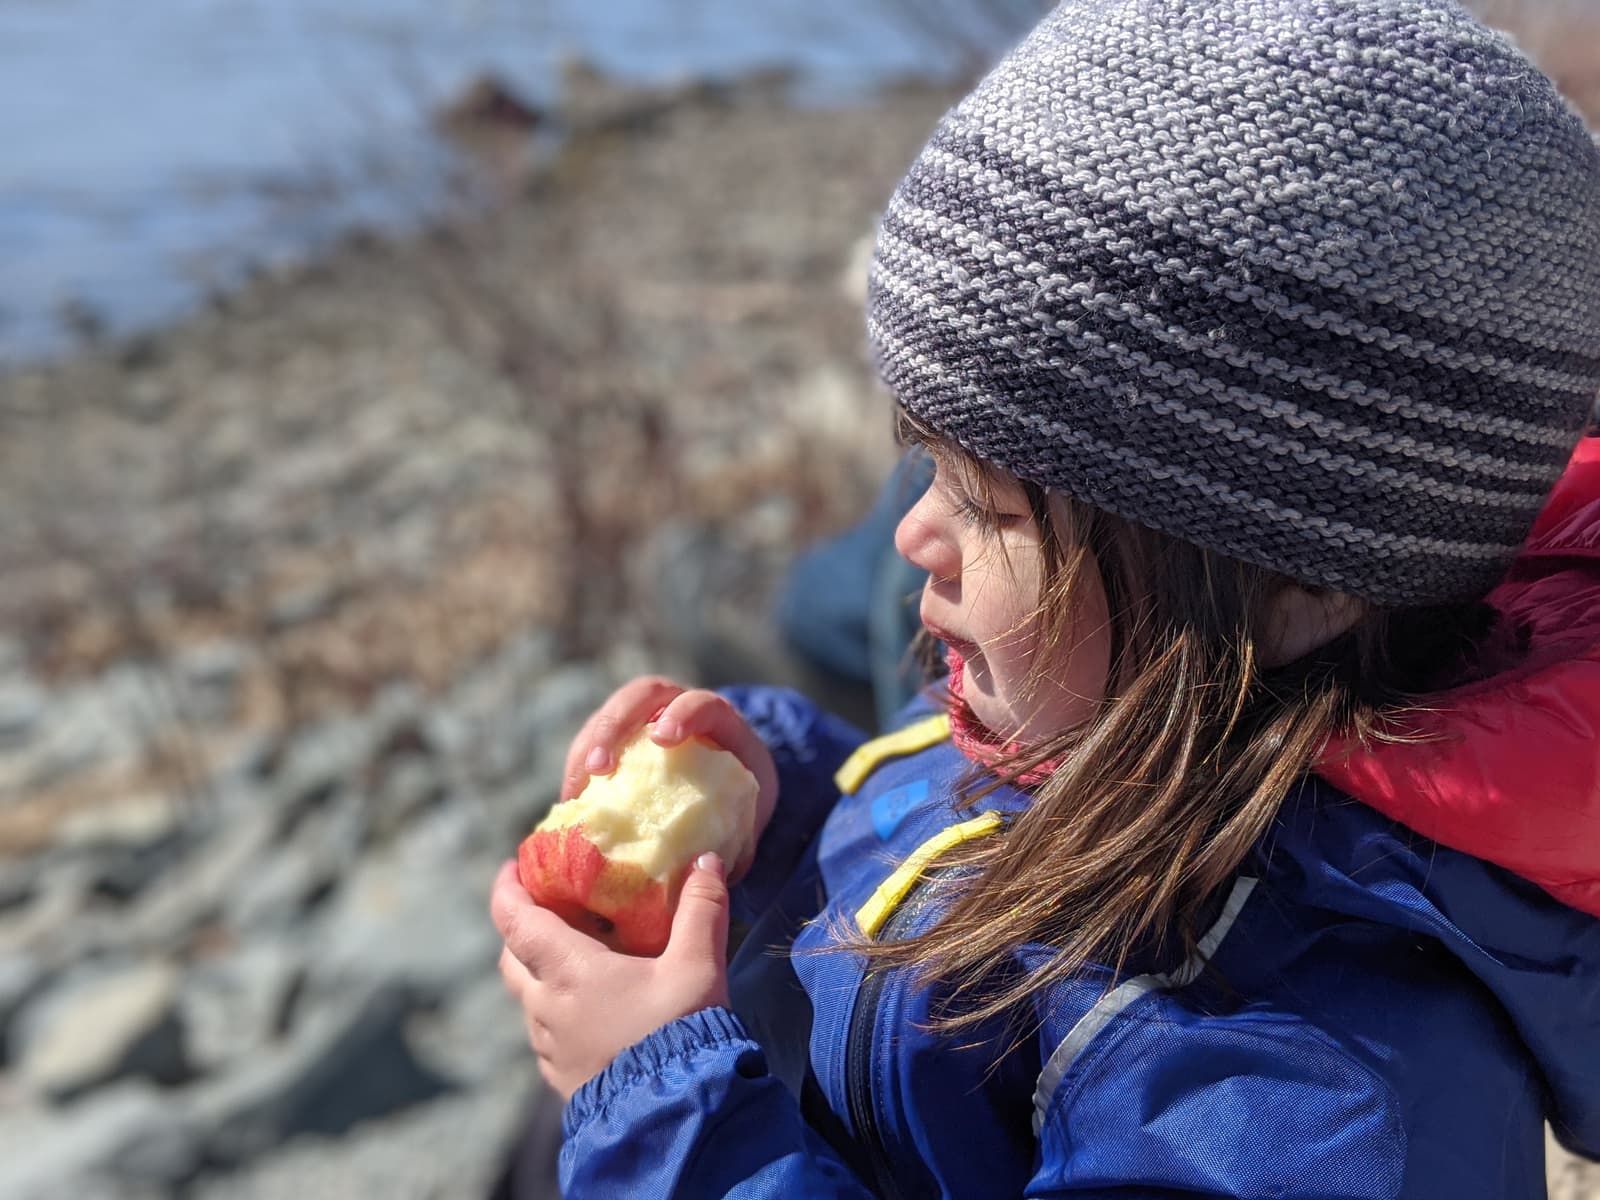 image description: a young child in a handknit hat, holding a partially eaten apple